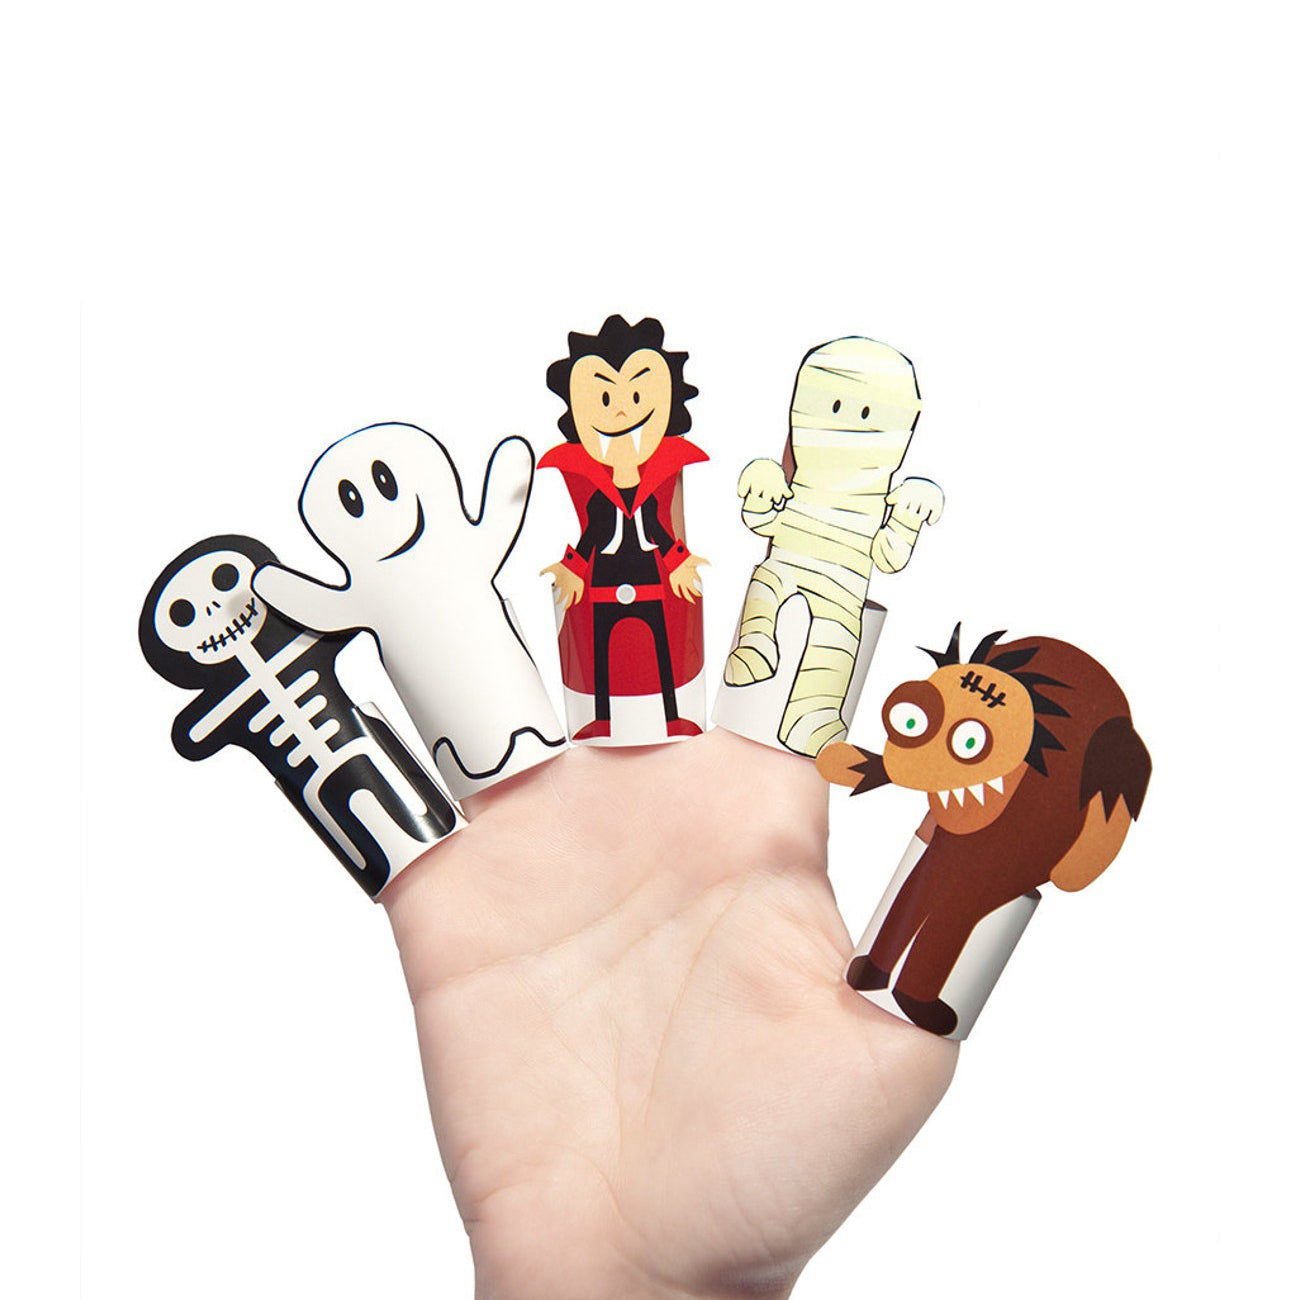 Finger Puppets - Classic Monsters